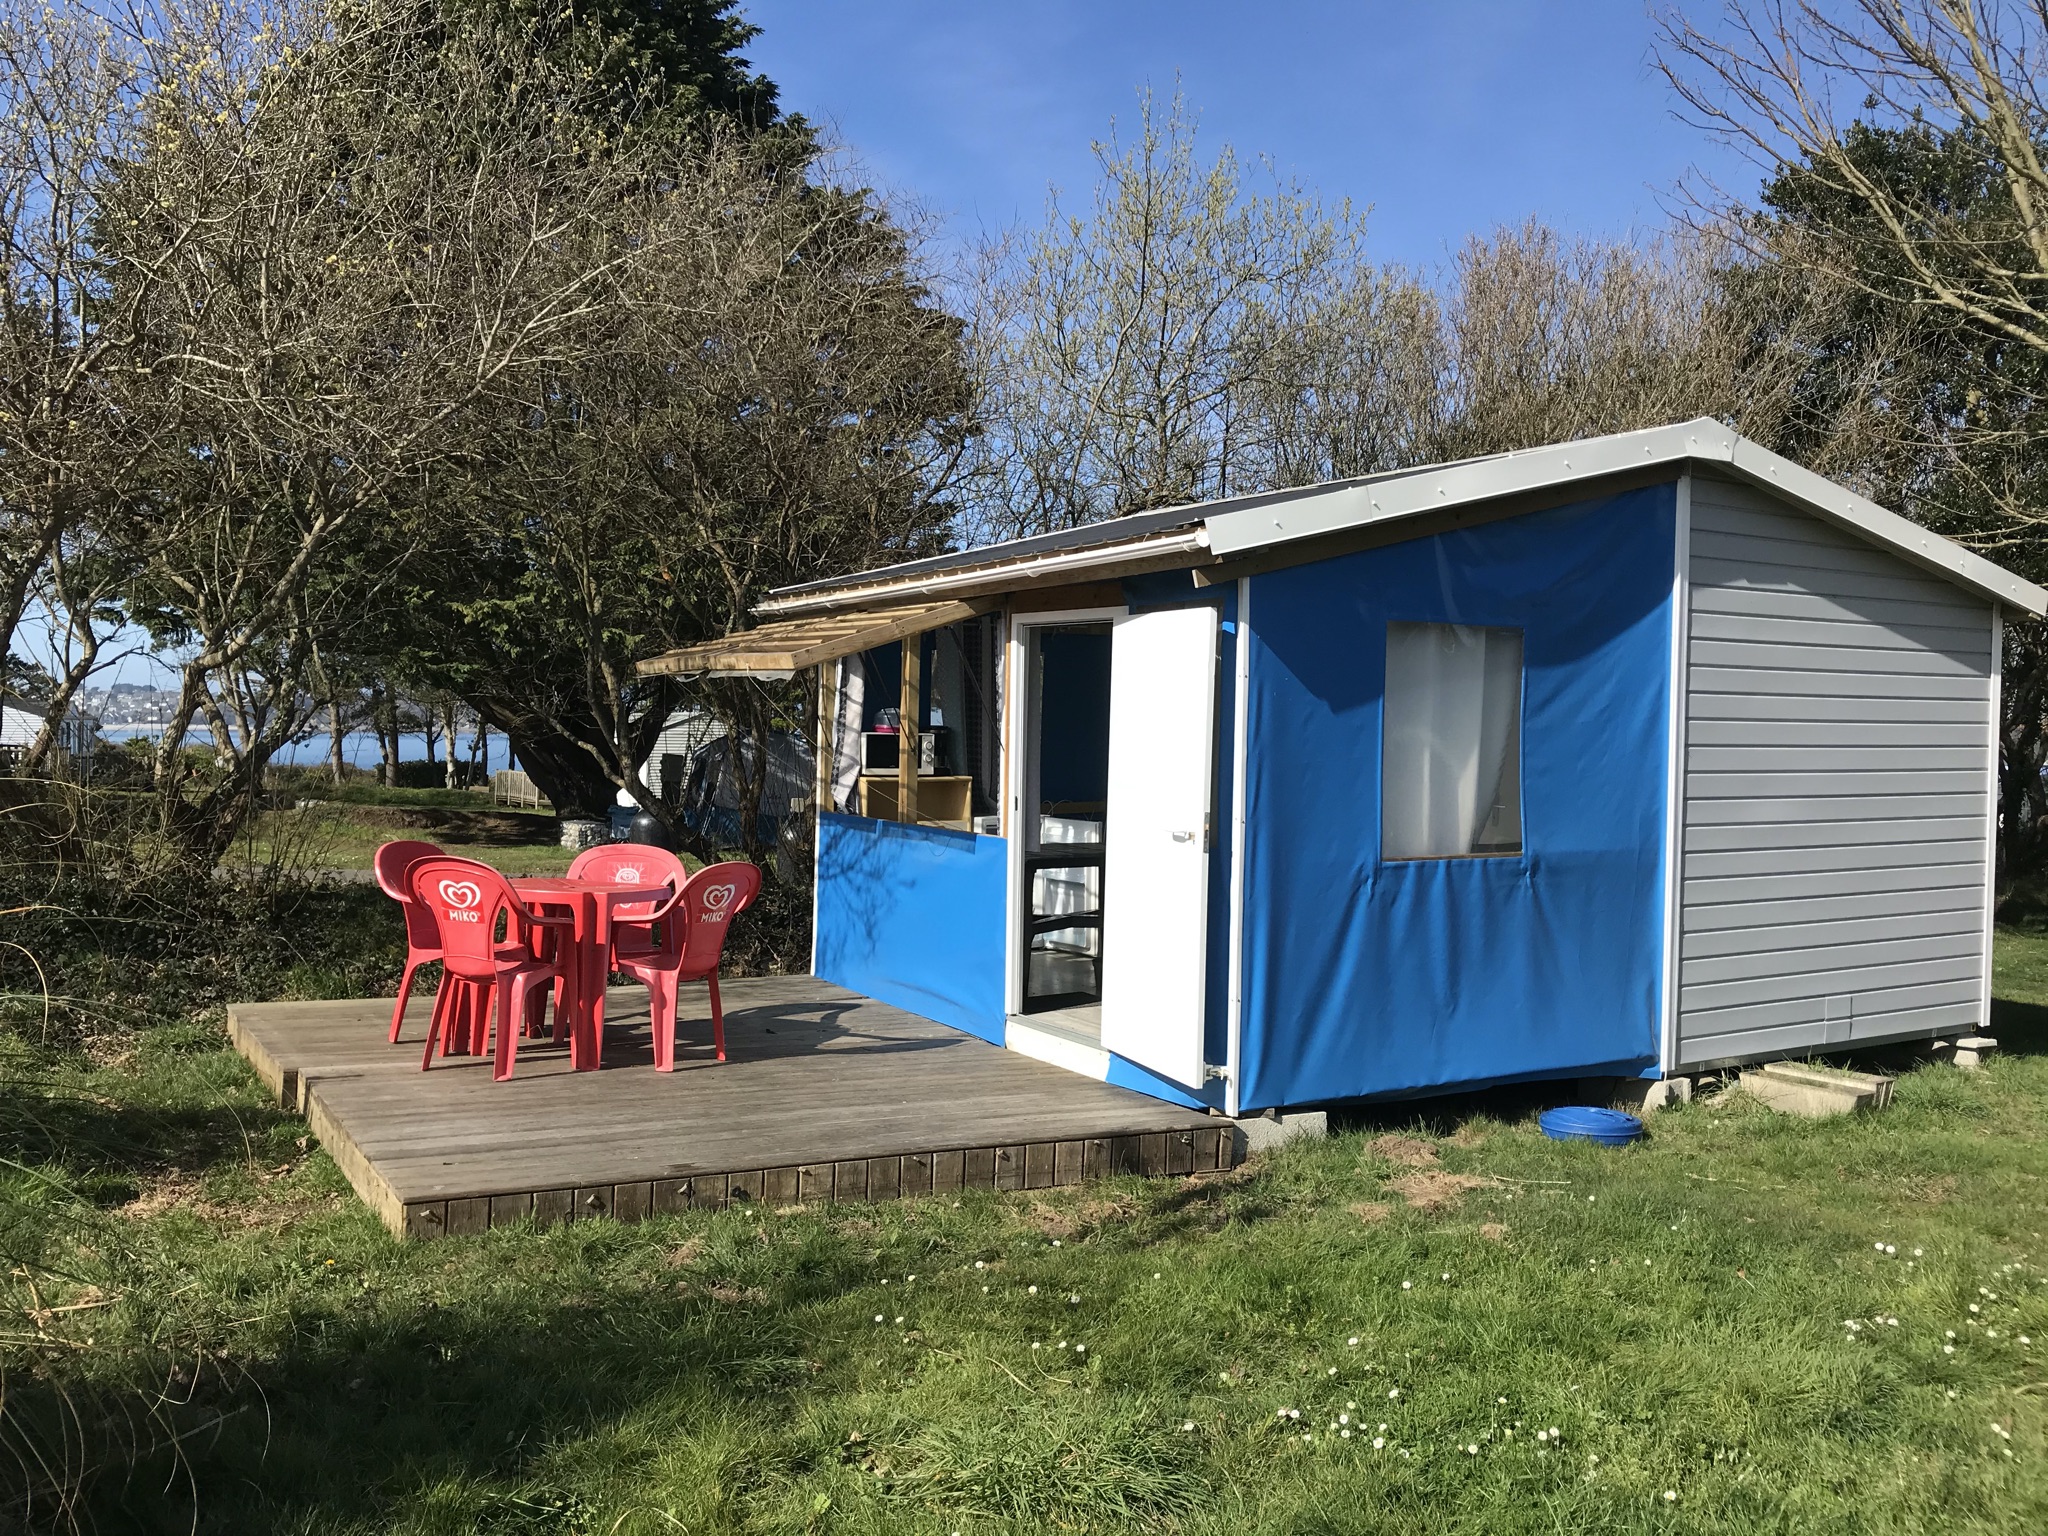 ty home : le mobile home esprit camping